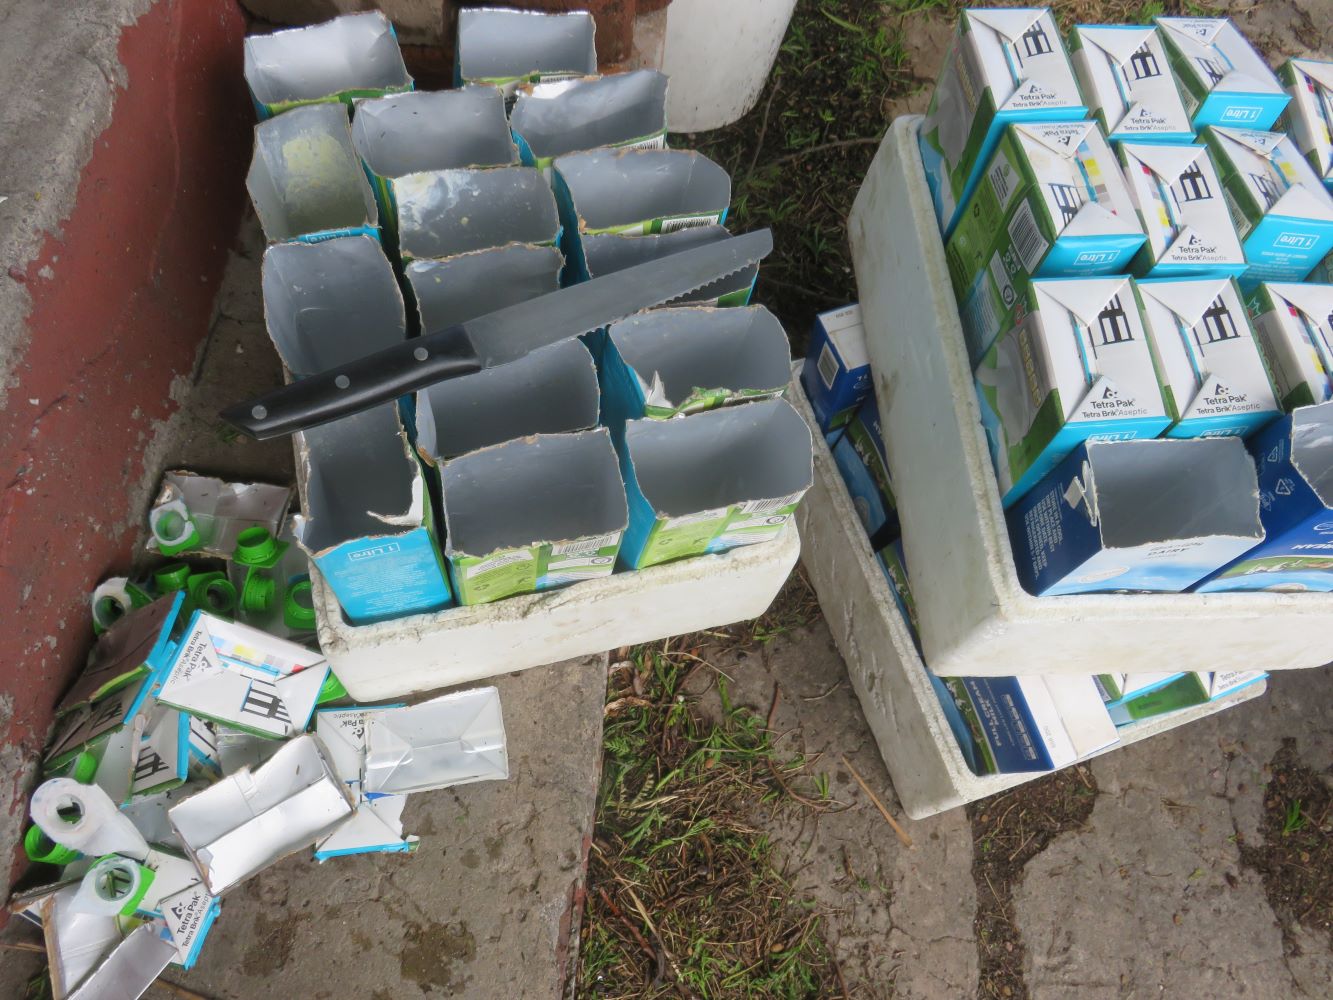 De-capping the milk cartons. They have a waxed cardboard exterior and a plastic and foil lining.